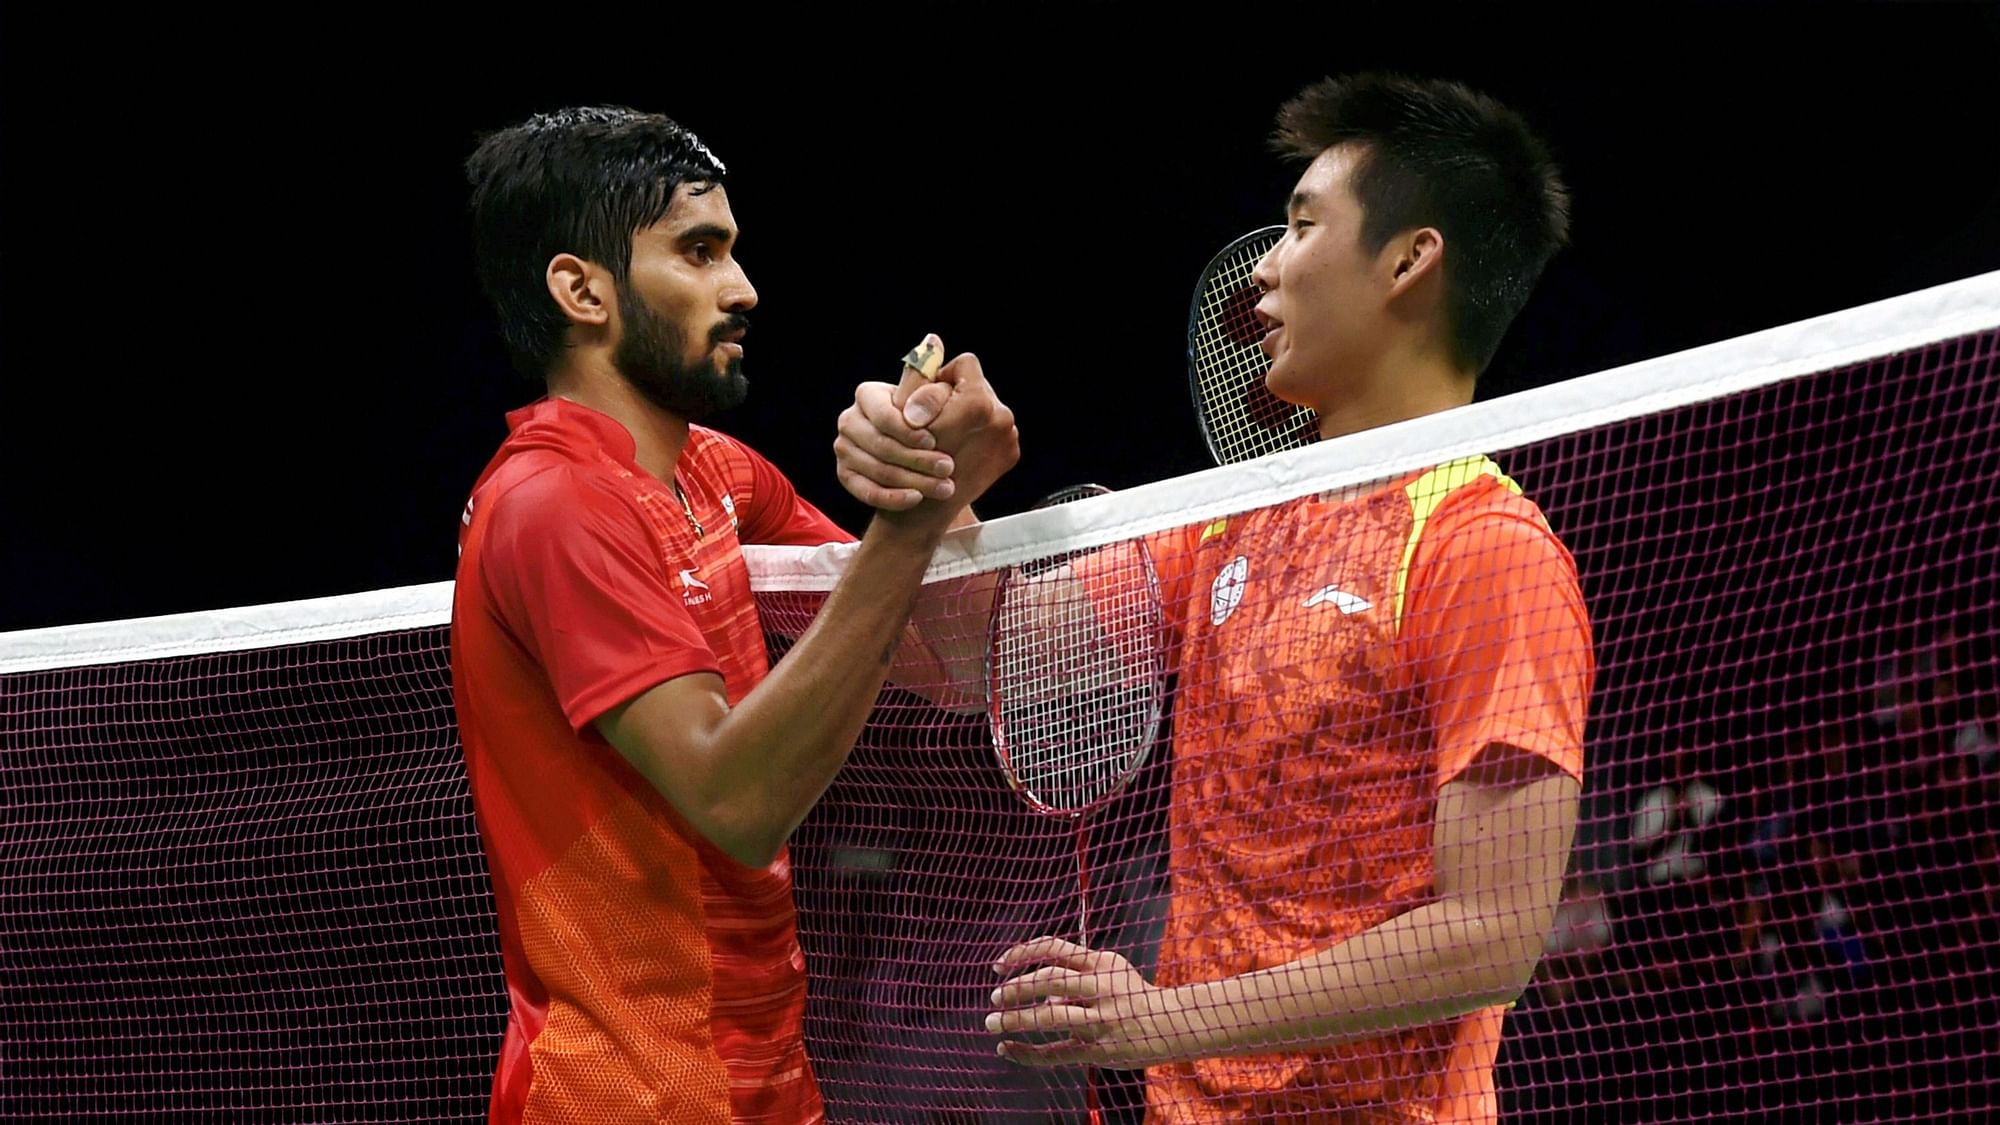 Top shuttlers are complaining that the World Badminton Federation is ignoring the Coronavirus threat by continuing with tournaments.